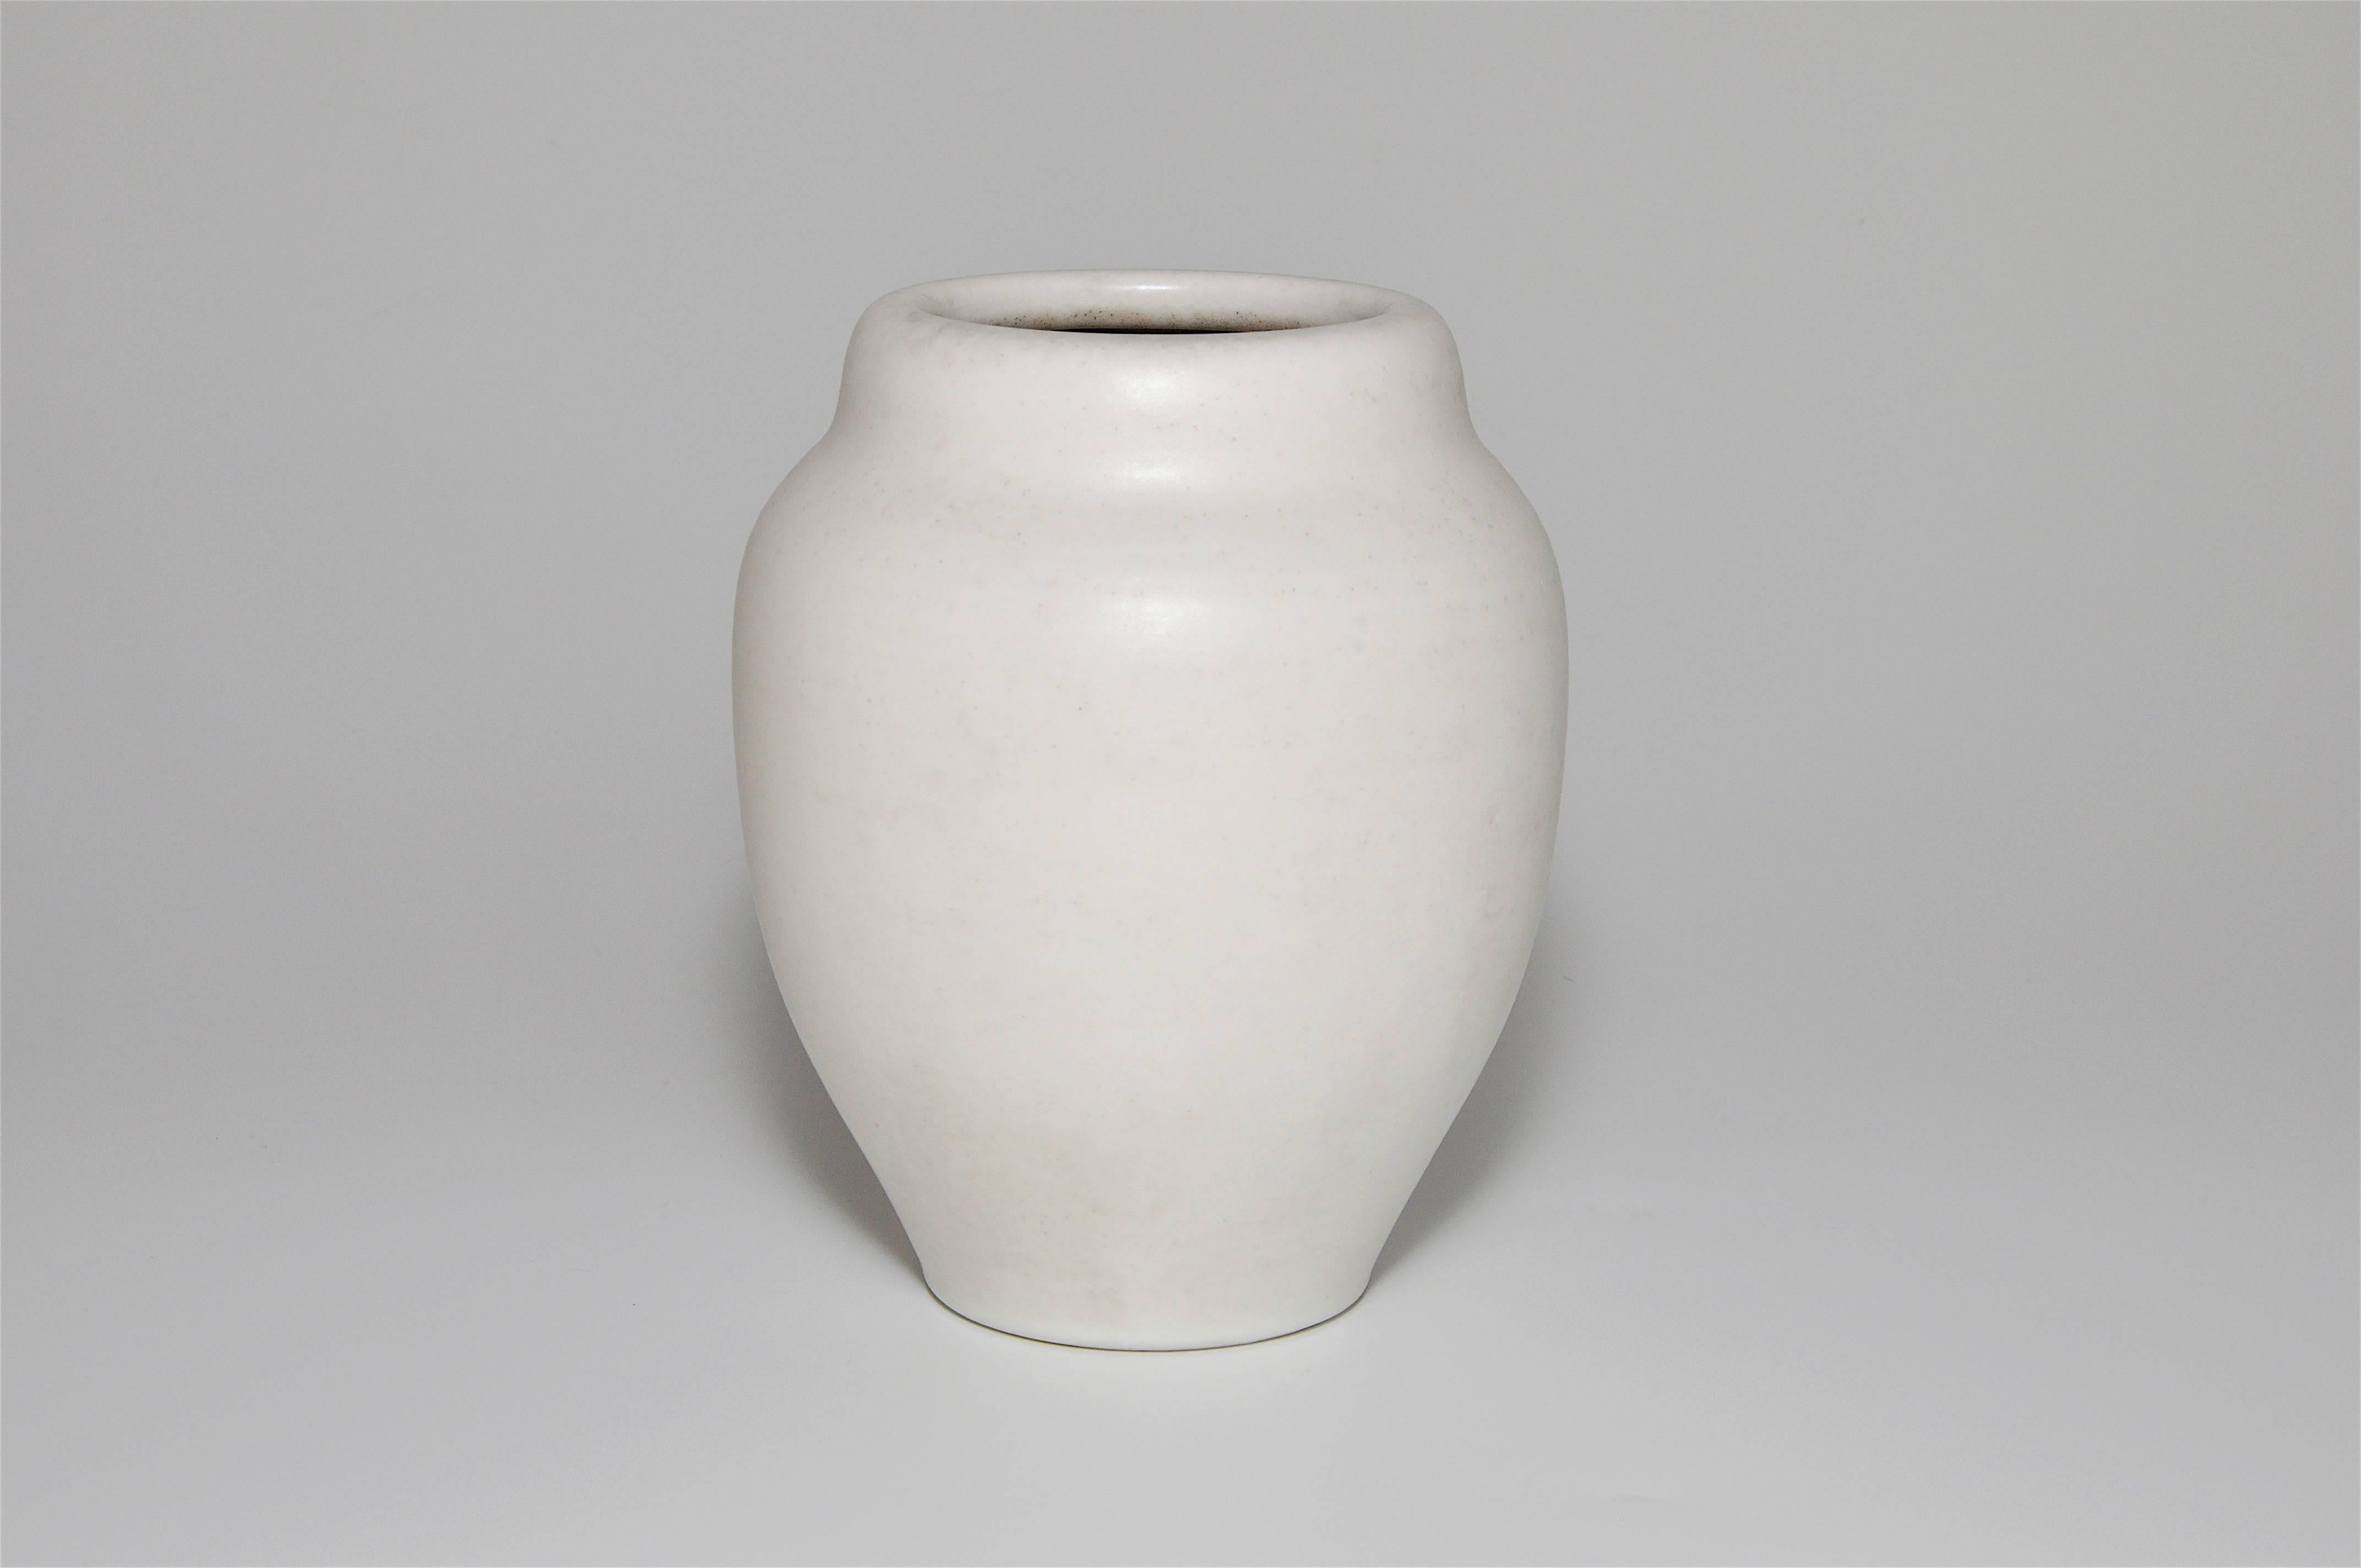 A beautiful piece of English art pottery in a delicate ivory white matt eggshell finish with a faint speckle in the upper regions. With clean lines and a soft voluptuous lip, this is a classic piece of Art Deco. The color makes it a very unusual